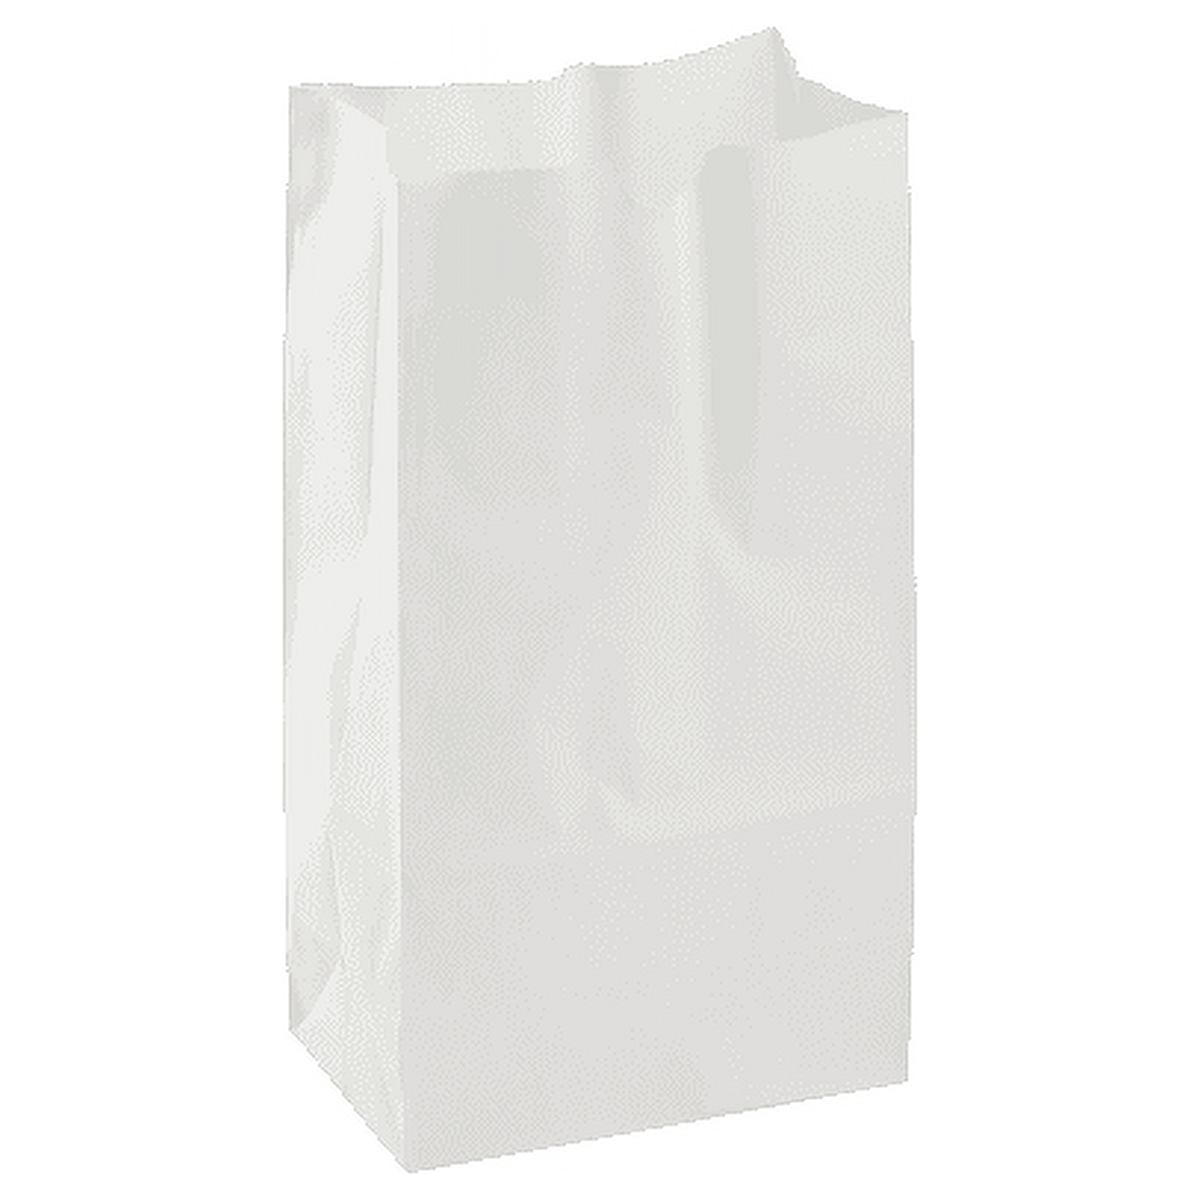 Ziploc Space Bags X-Large Plastic Bag (2-Pack) 645482 - The Home Depot